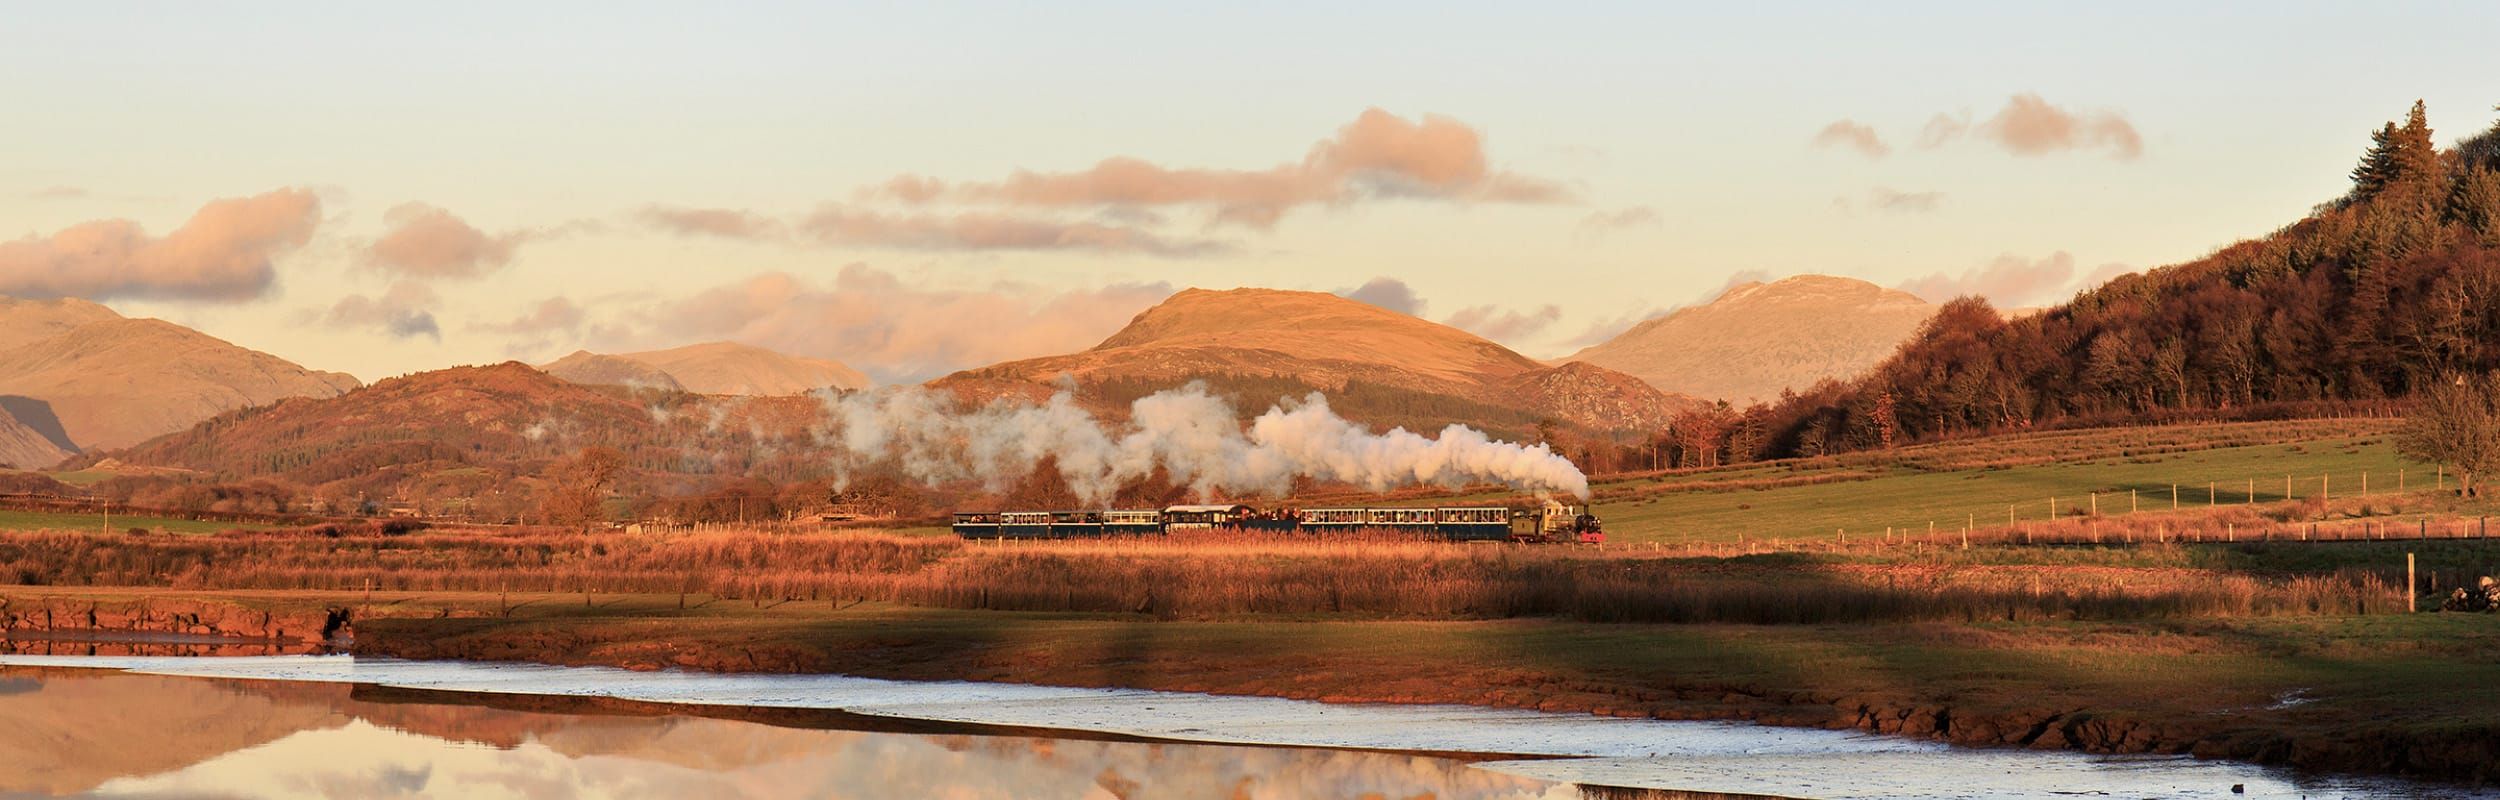 Steam railway train on the Ravenglass and Eskdale railway, with the stunning backdrop of the Western Lake District fells